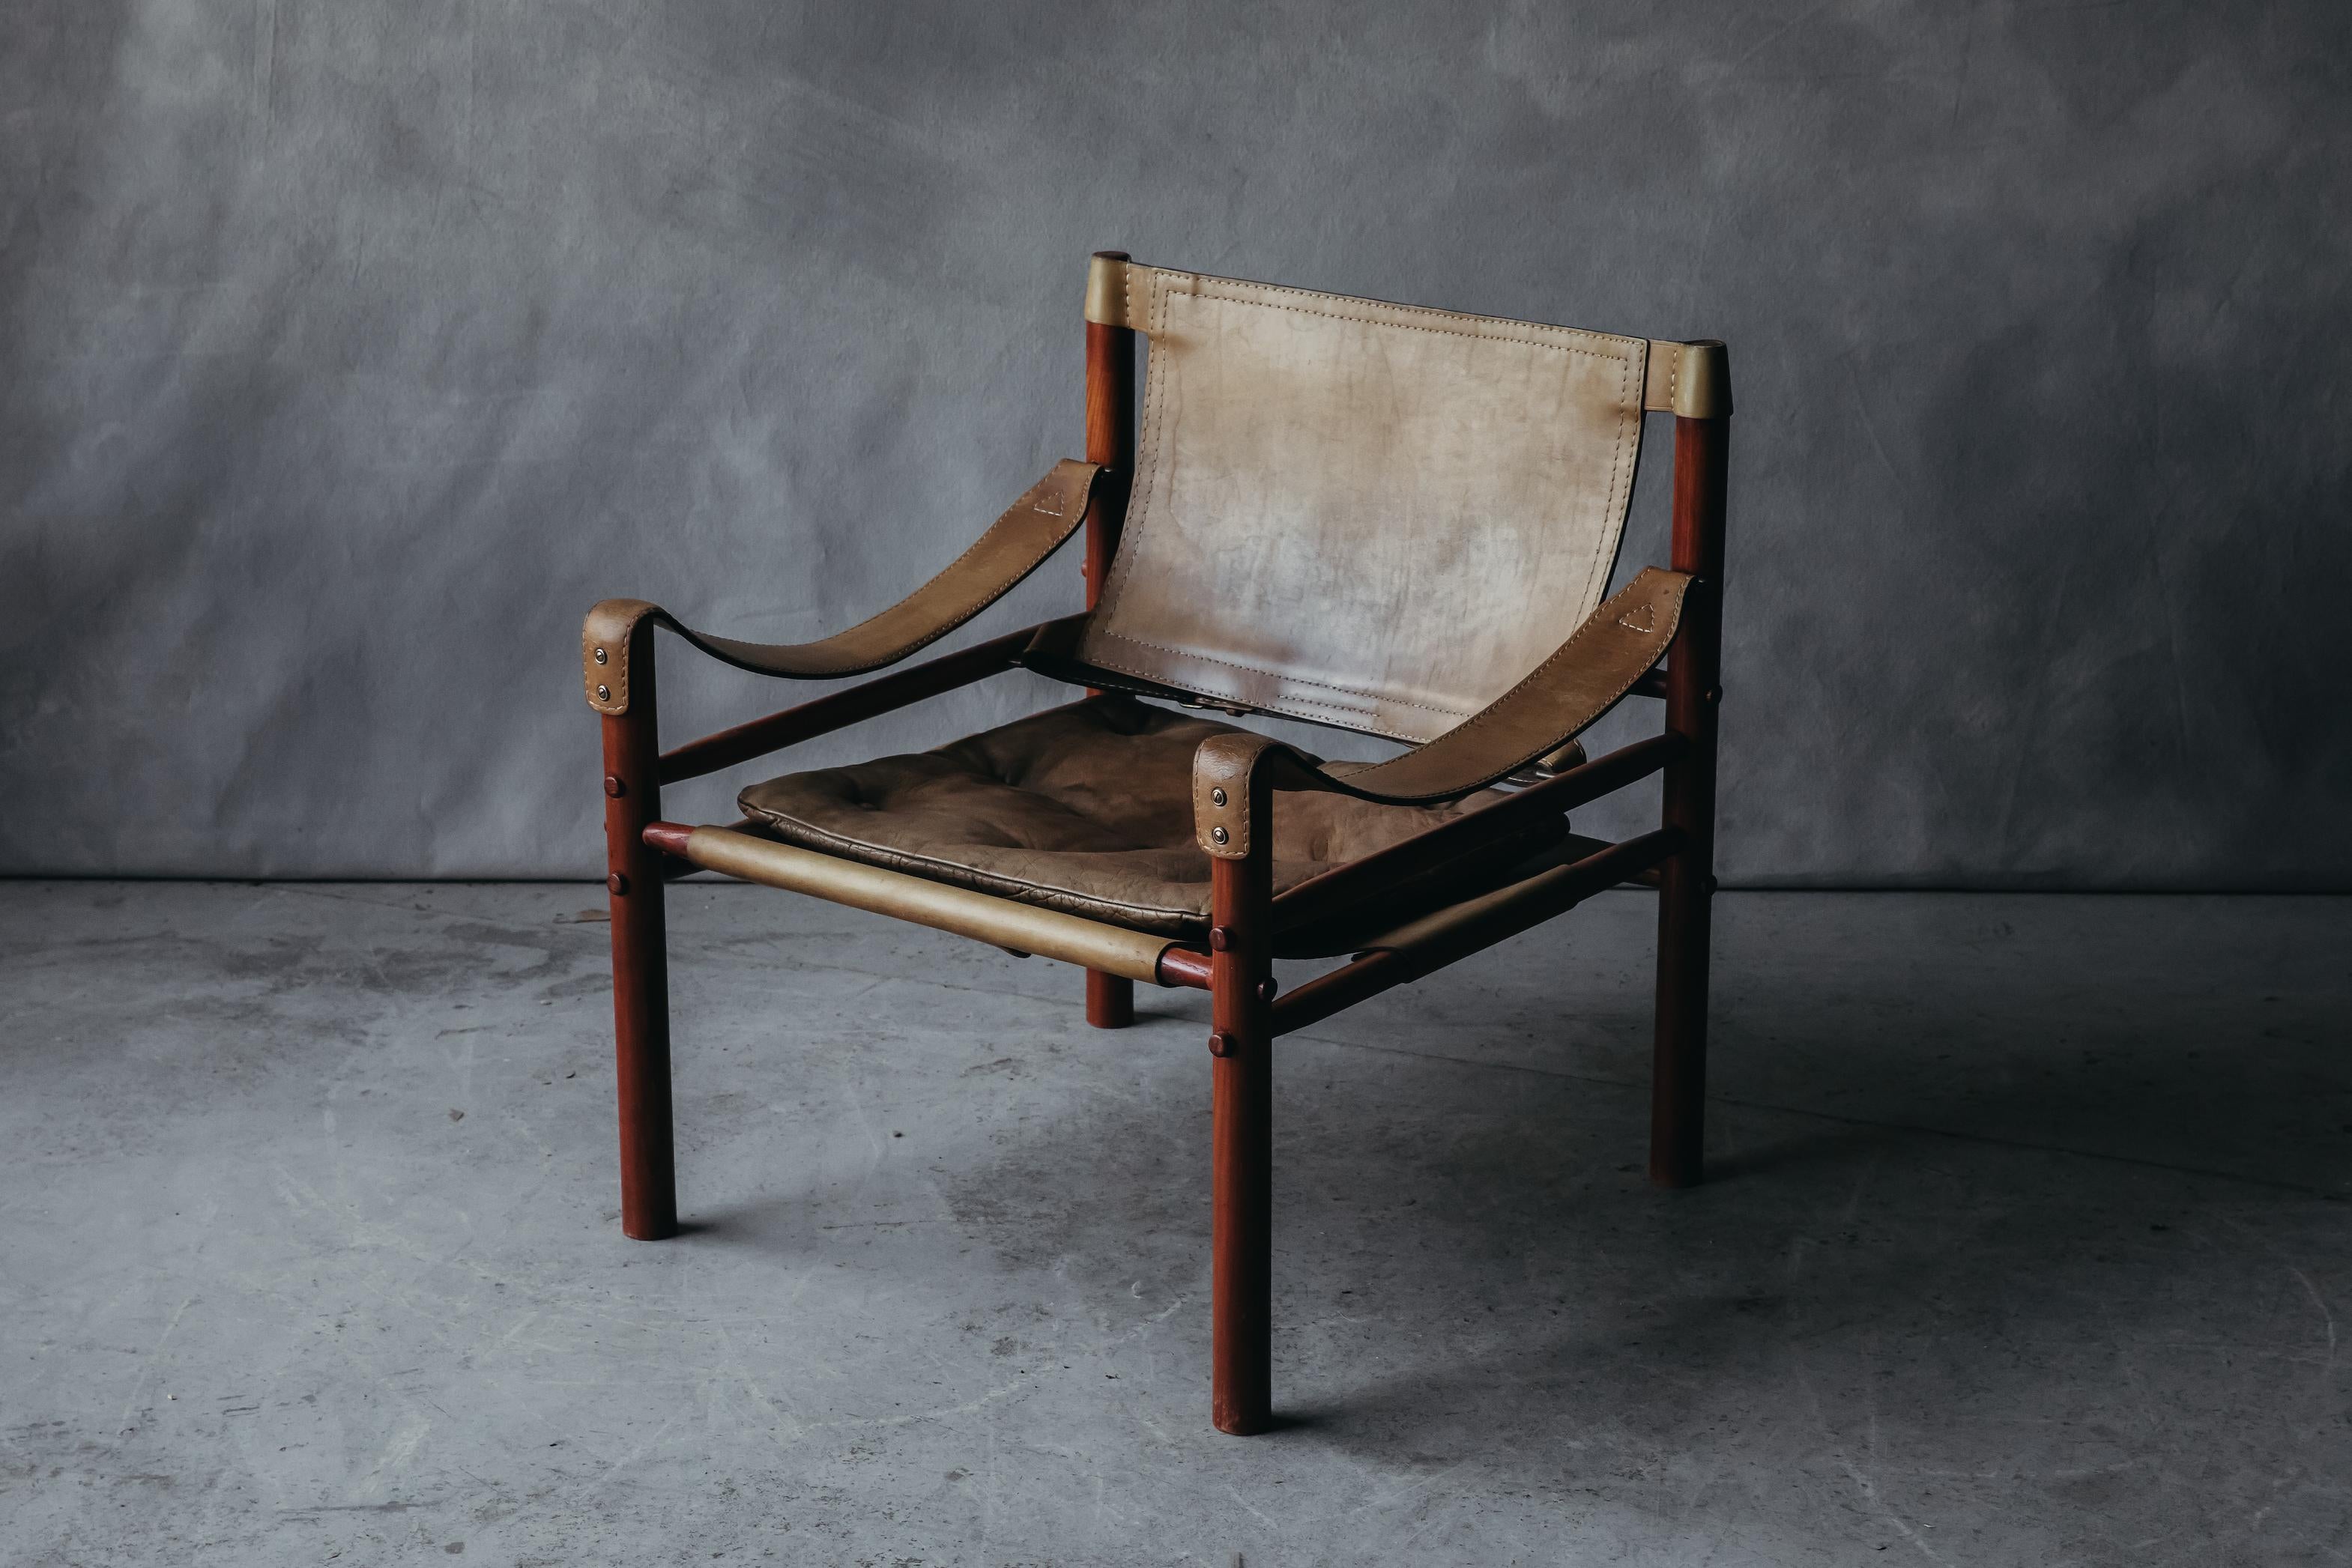 European Vintage Arne Norell Lounge Chair from Sweden, circa 1970 For Sale